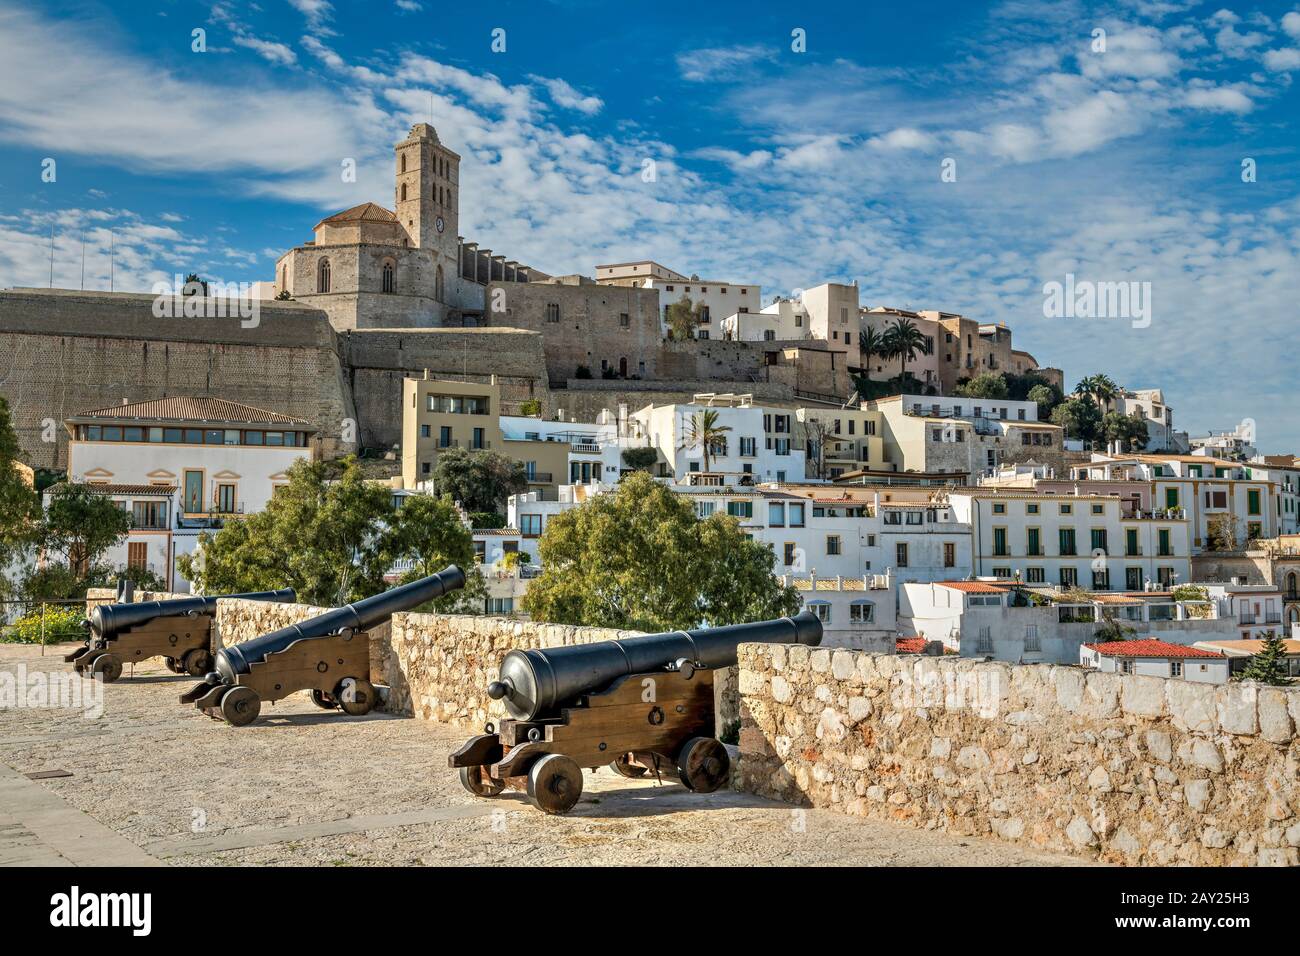 Cathedral and old town skyline, Dalt Vila, Ibiza, Balearic Islands, Spain Stock Photo